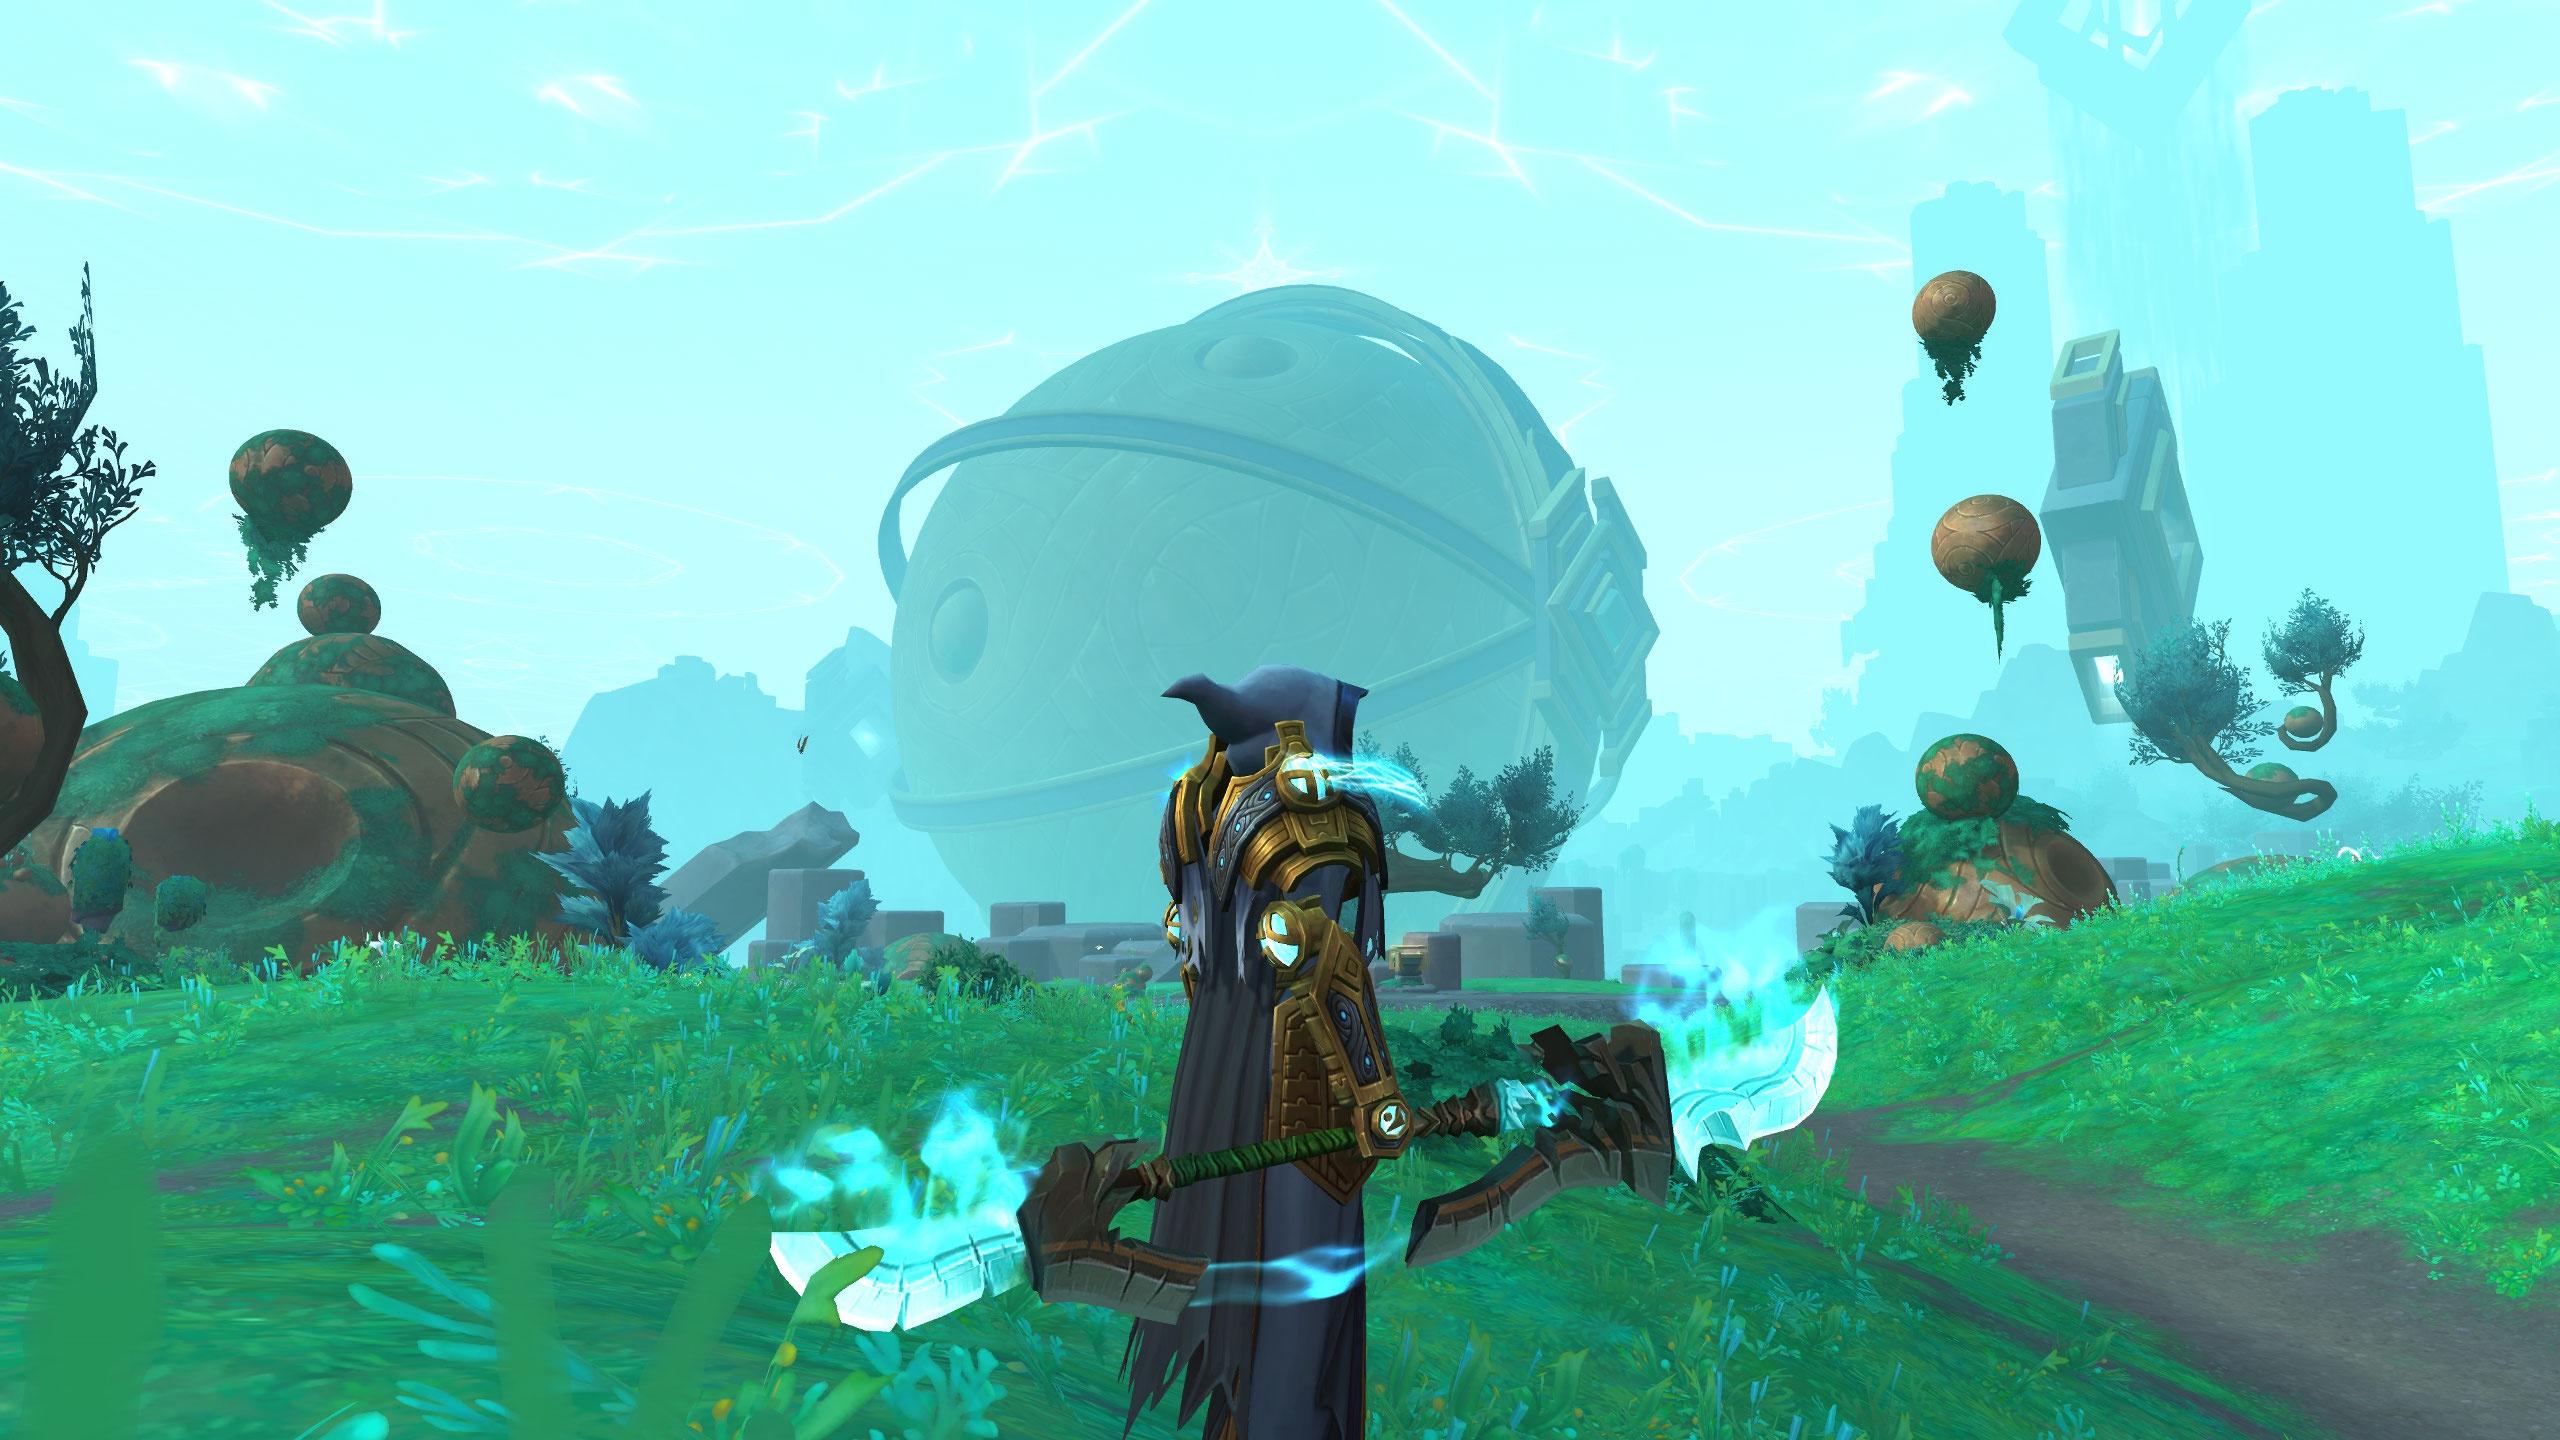 The Eternal Traveler Set From Wow Shadowlands. How to Get It Asap?